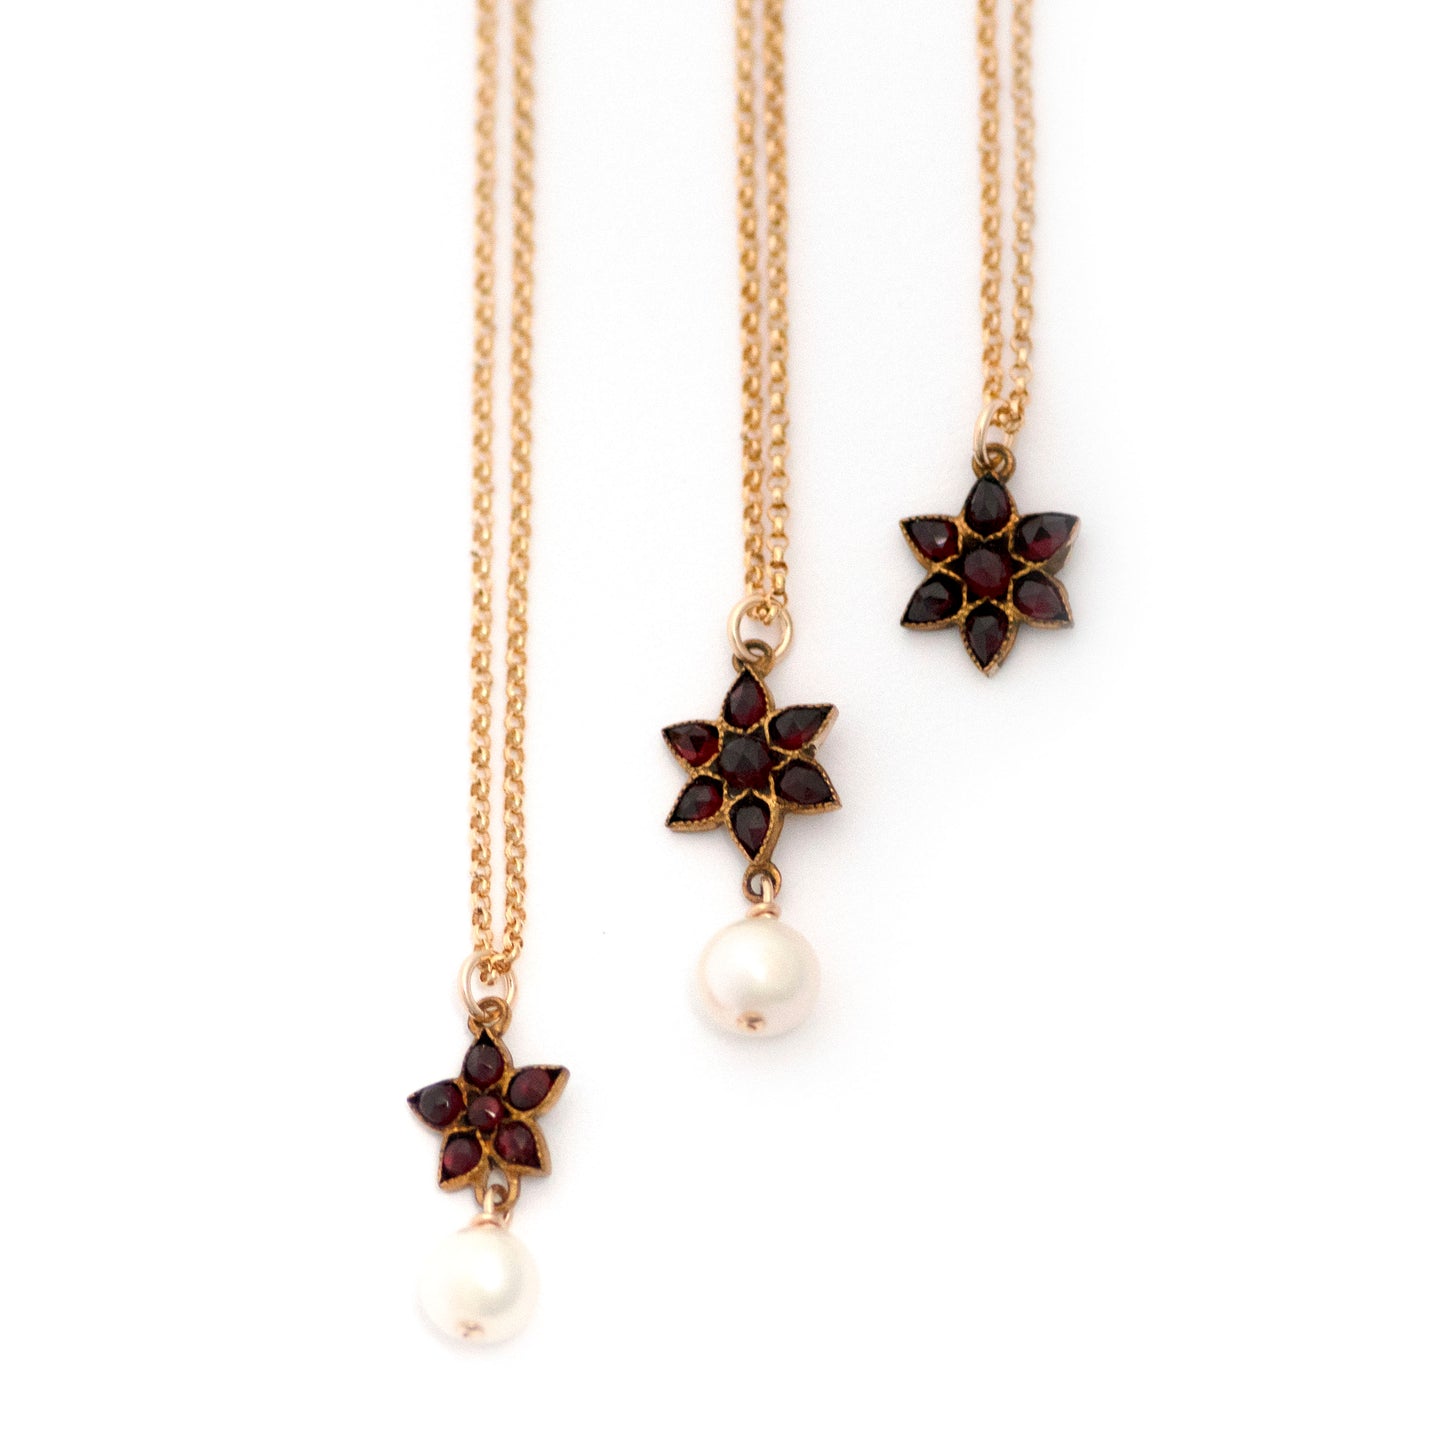 Three necklaces, each with star pendants filled with Bohemian Garnets. Two of the necklaces have a wire wrapped freshwater pearl dangling from the star pendant.